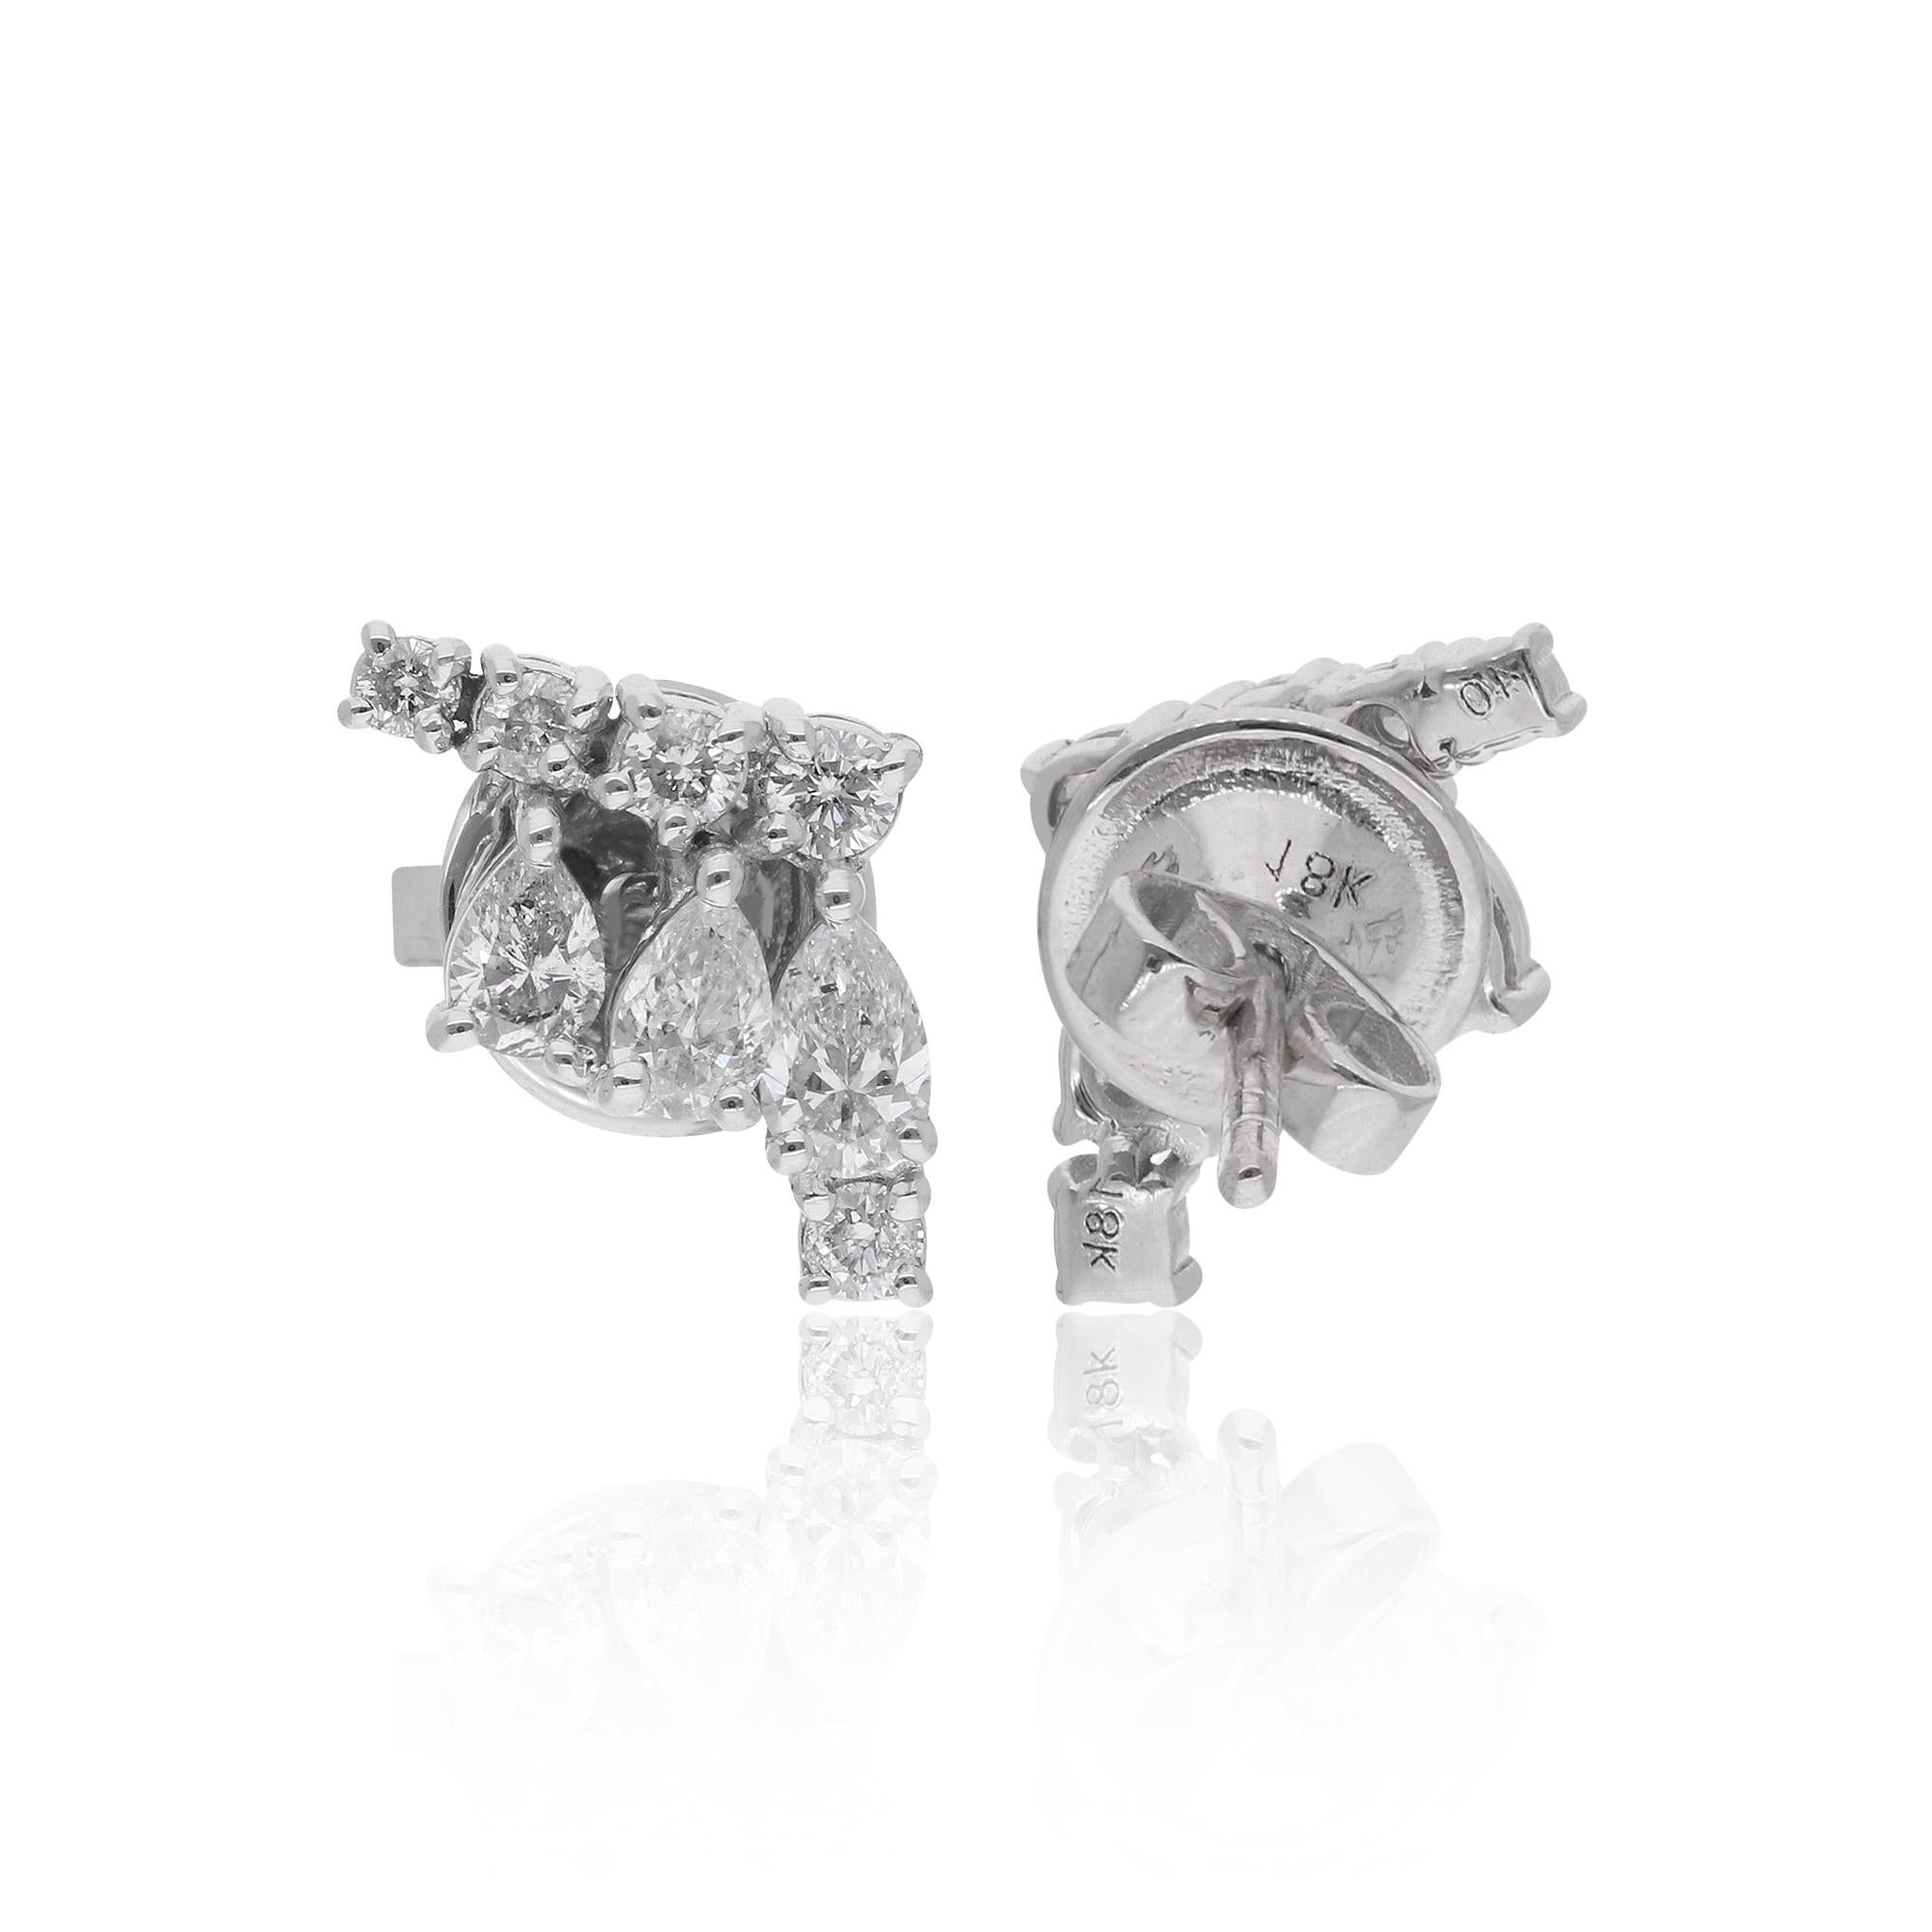 The 18 karat white gold setting provides a luxurious backdrop for the dazzling diamonds, enhancing their brilliance and ensuring lasting beauty. The secure stud closure offers both comfort and confidence, allowing you to wear these stunning earrings